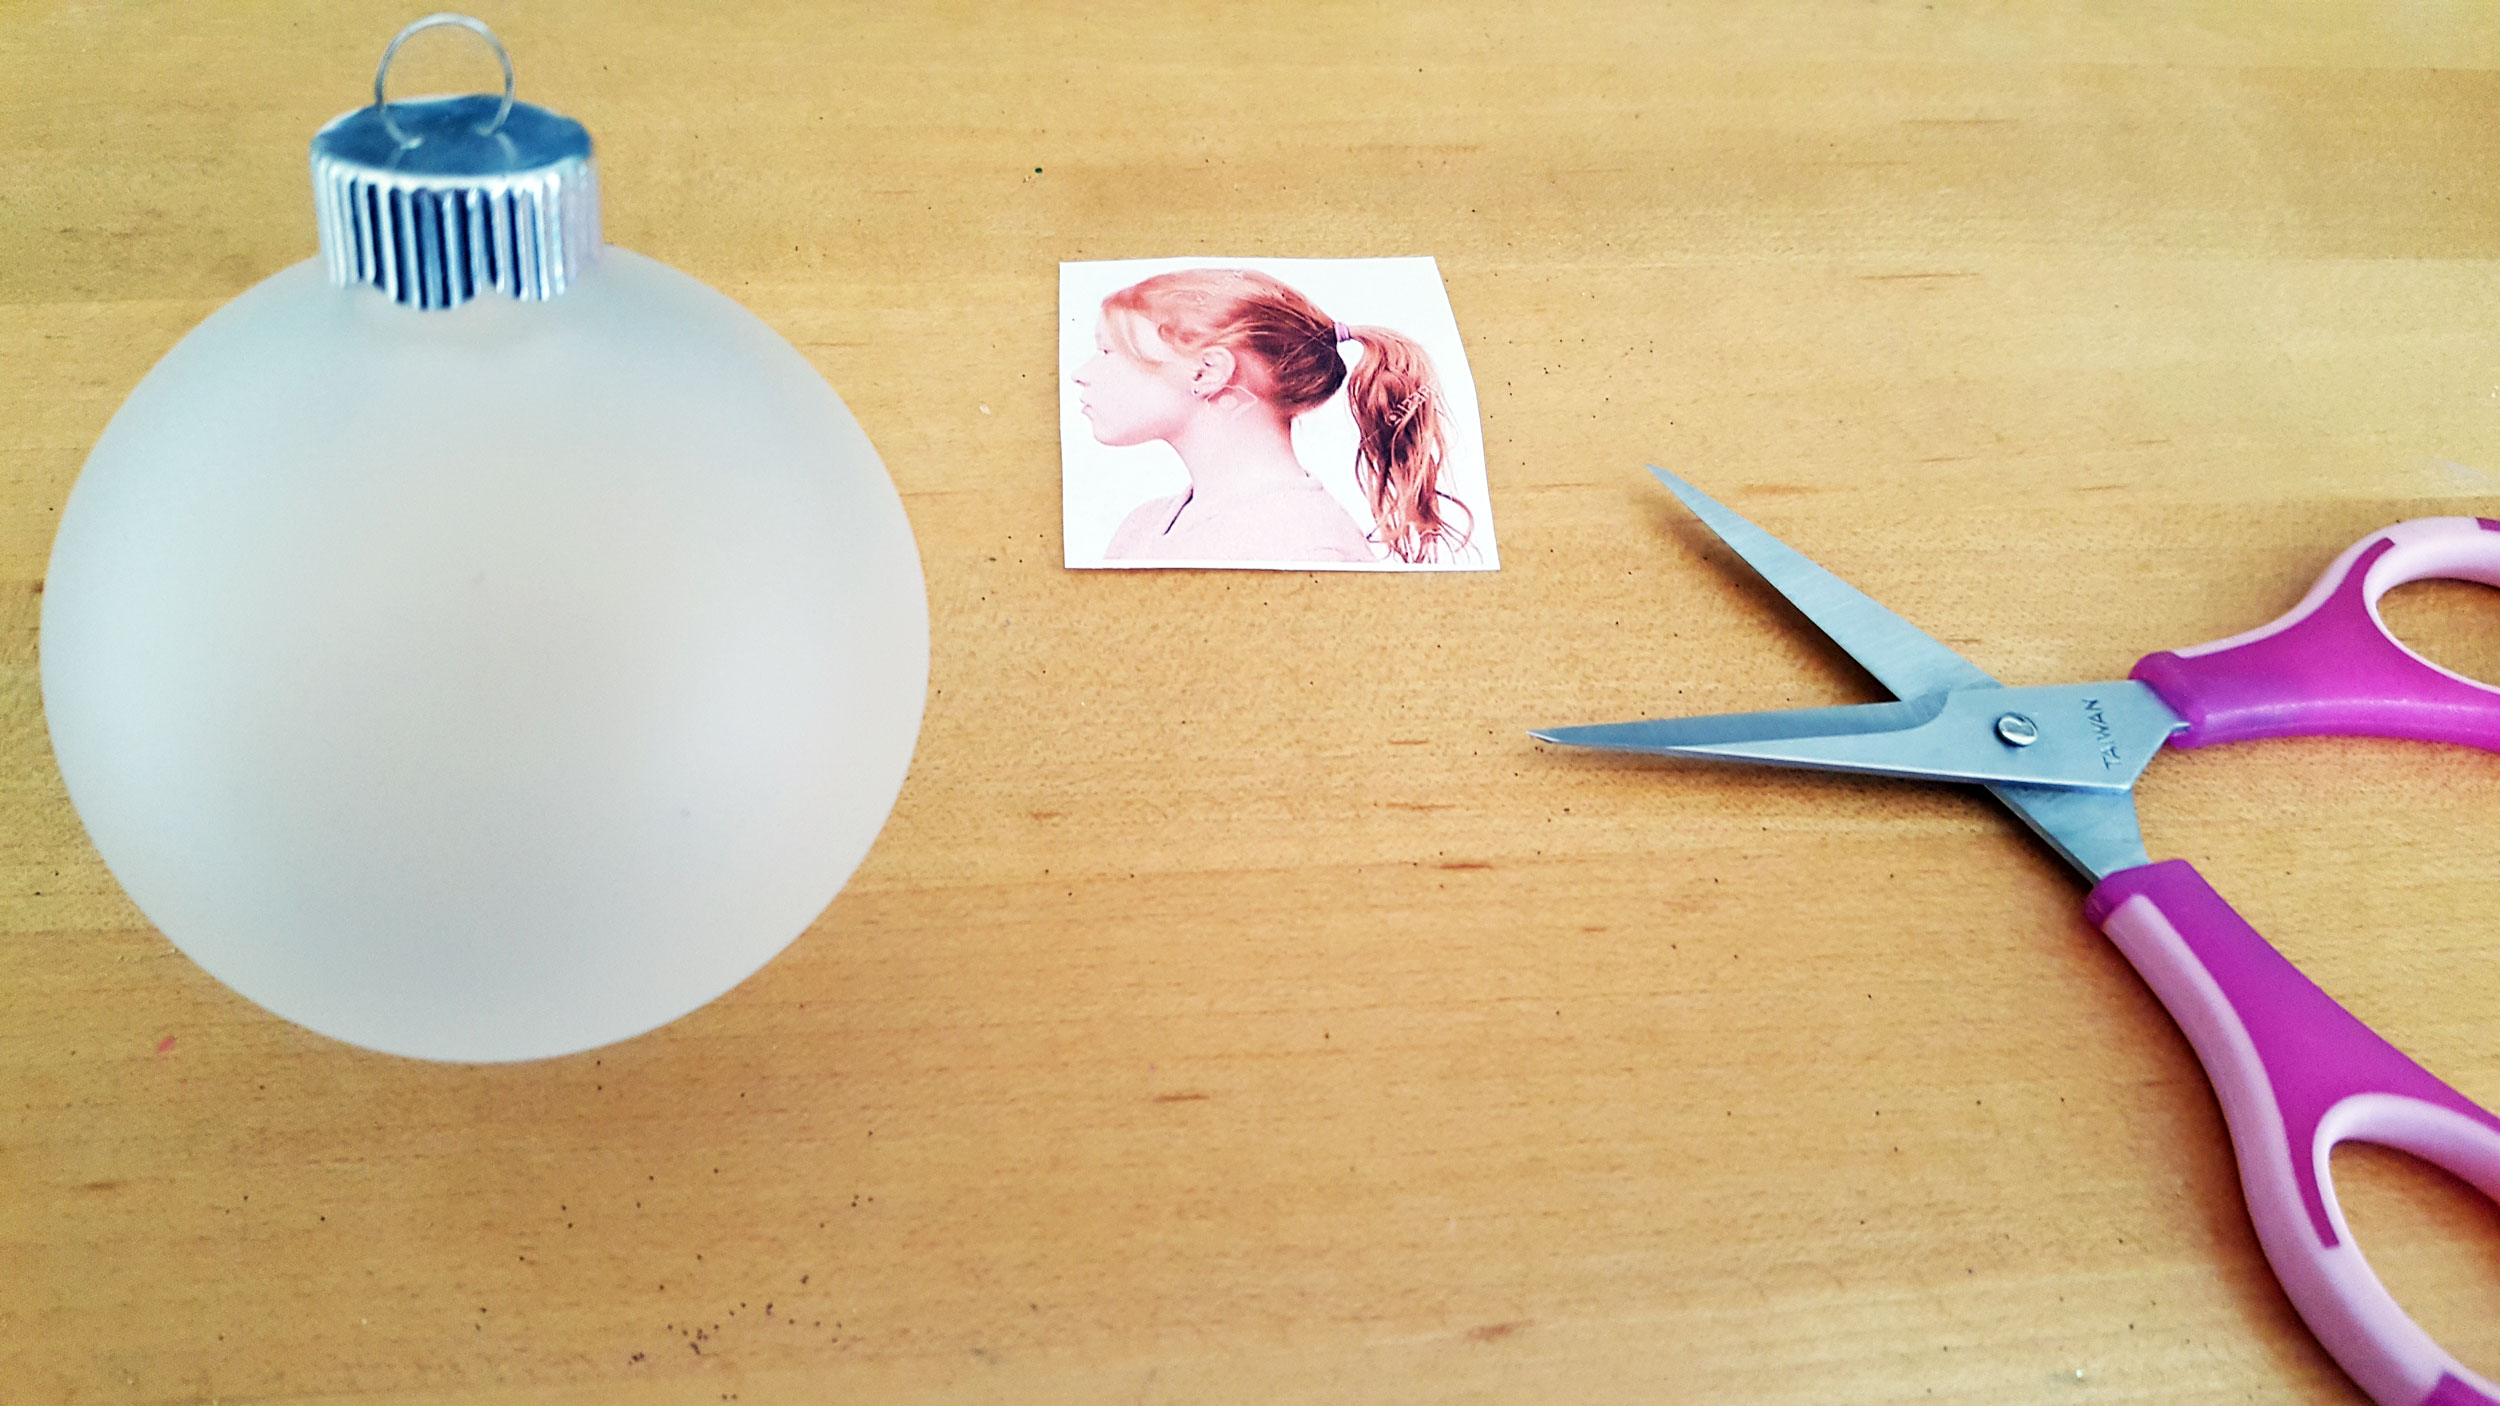 A frosted glass ball ornament next to a small pair of sewing scissors and a 2 inch tall cut out picture of a girl. | OrnamentShop.com